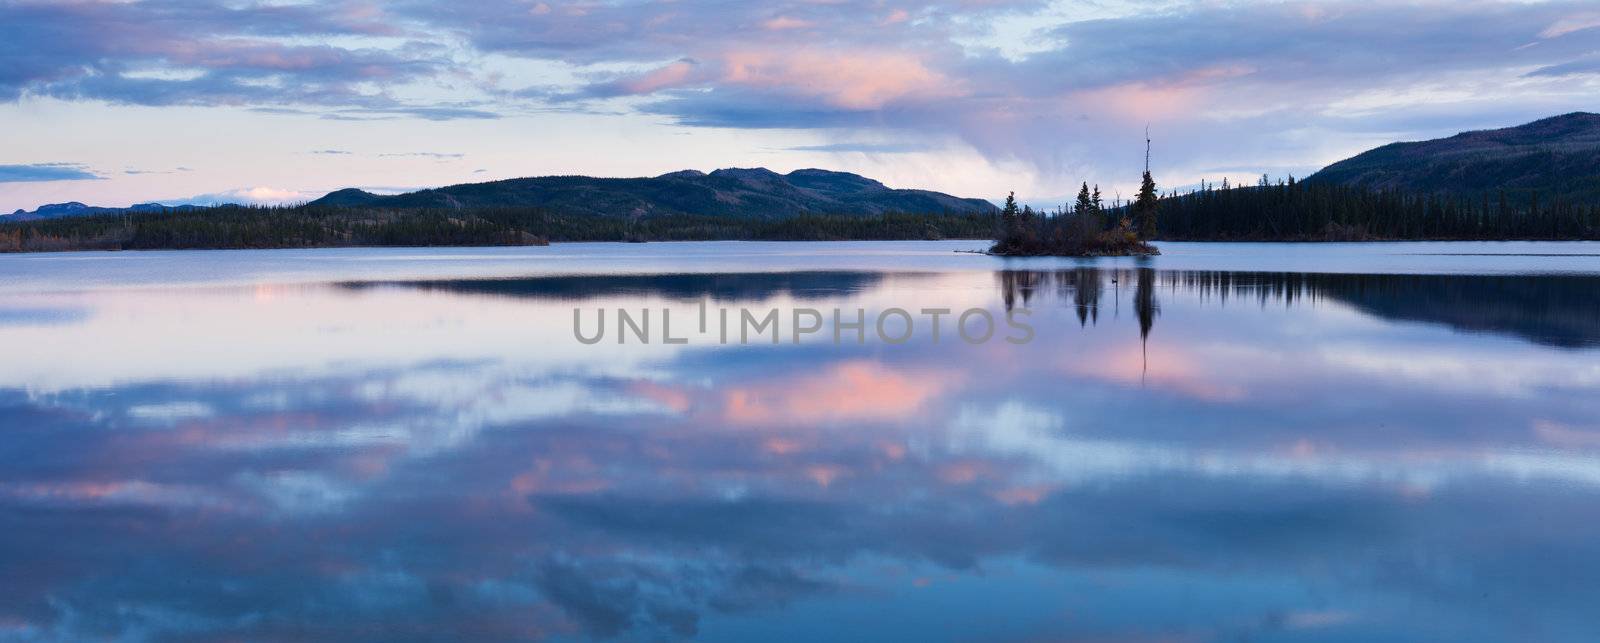 Calm Twin Lakes at Sunset, Yukon Territory, Canada by PiLens